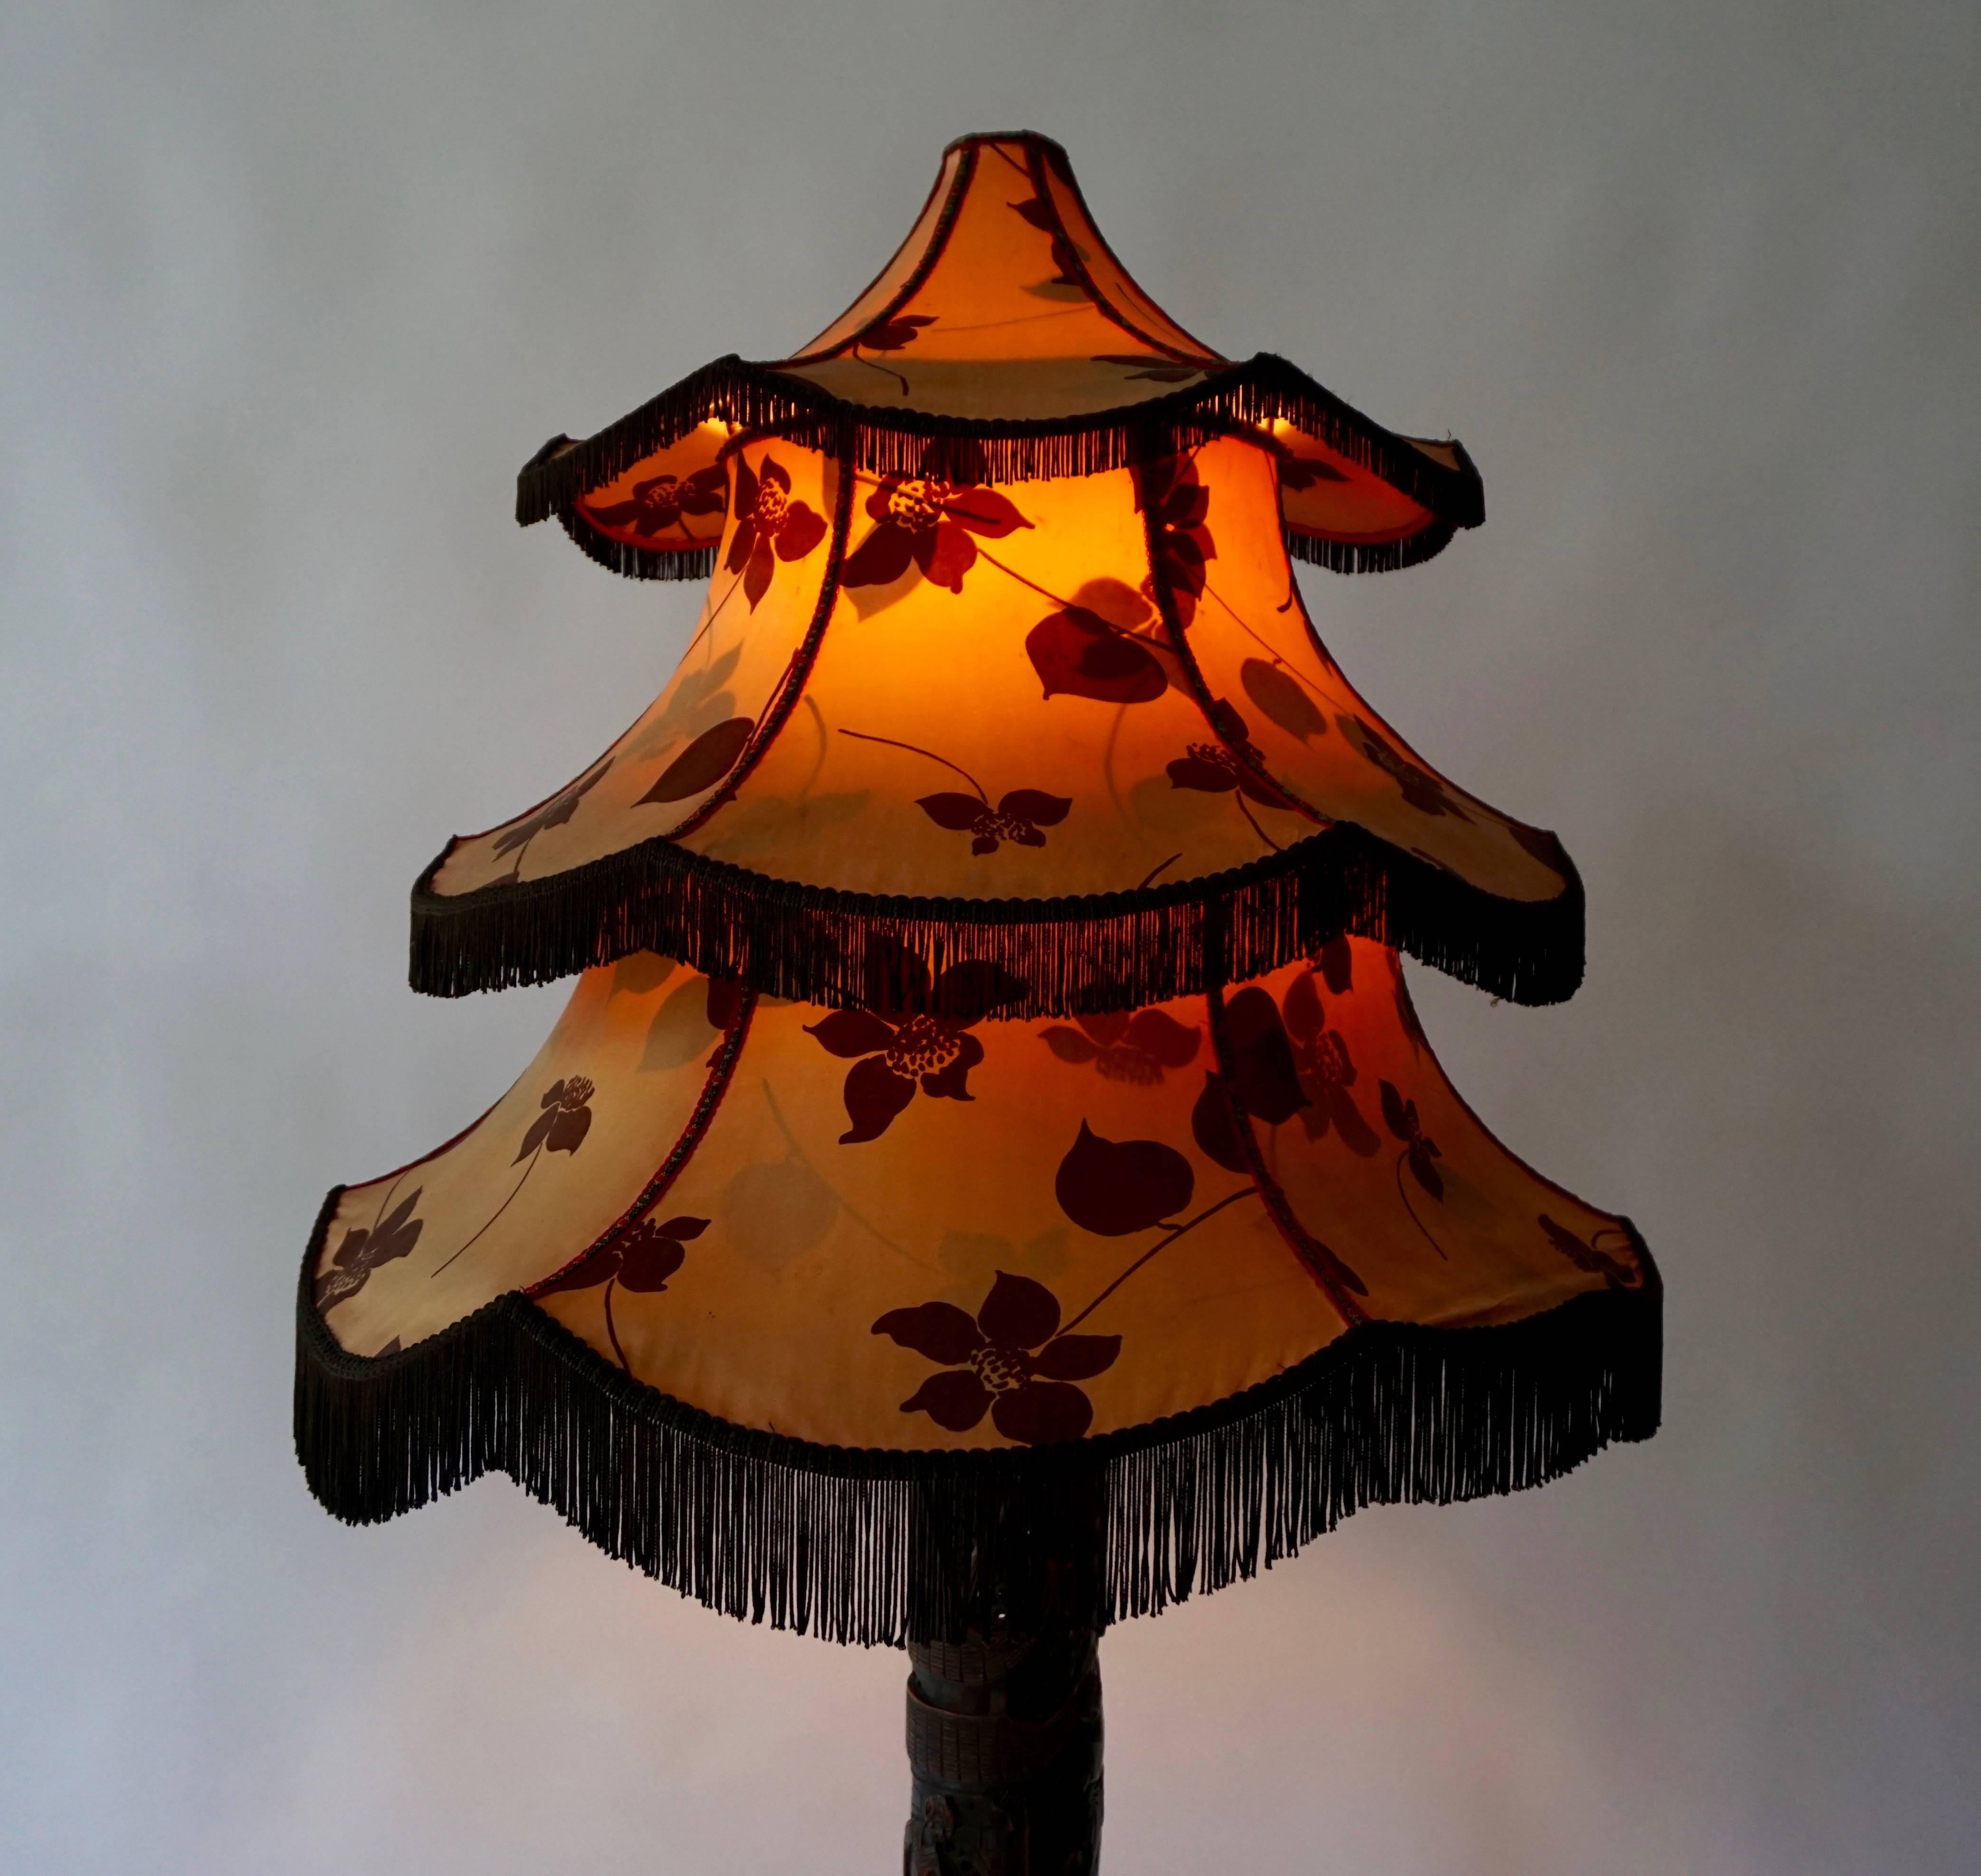 Chinese floor lamp.
For your consideration an antique floor lamp. Hand carved sculpture base in solid rosewood with a beautiful original pagoda shade decorated with flowers. China circa the 1920s.Wood in good shape. Nice details on the